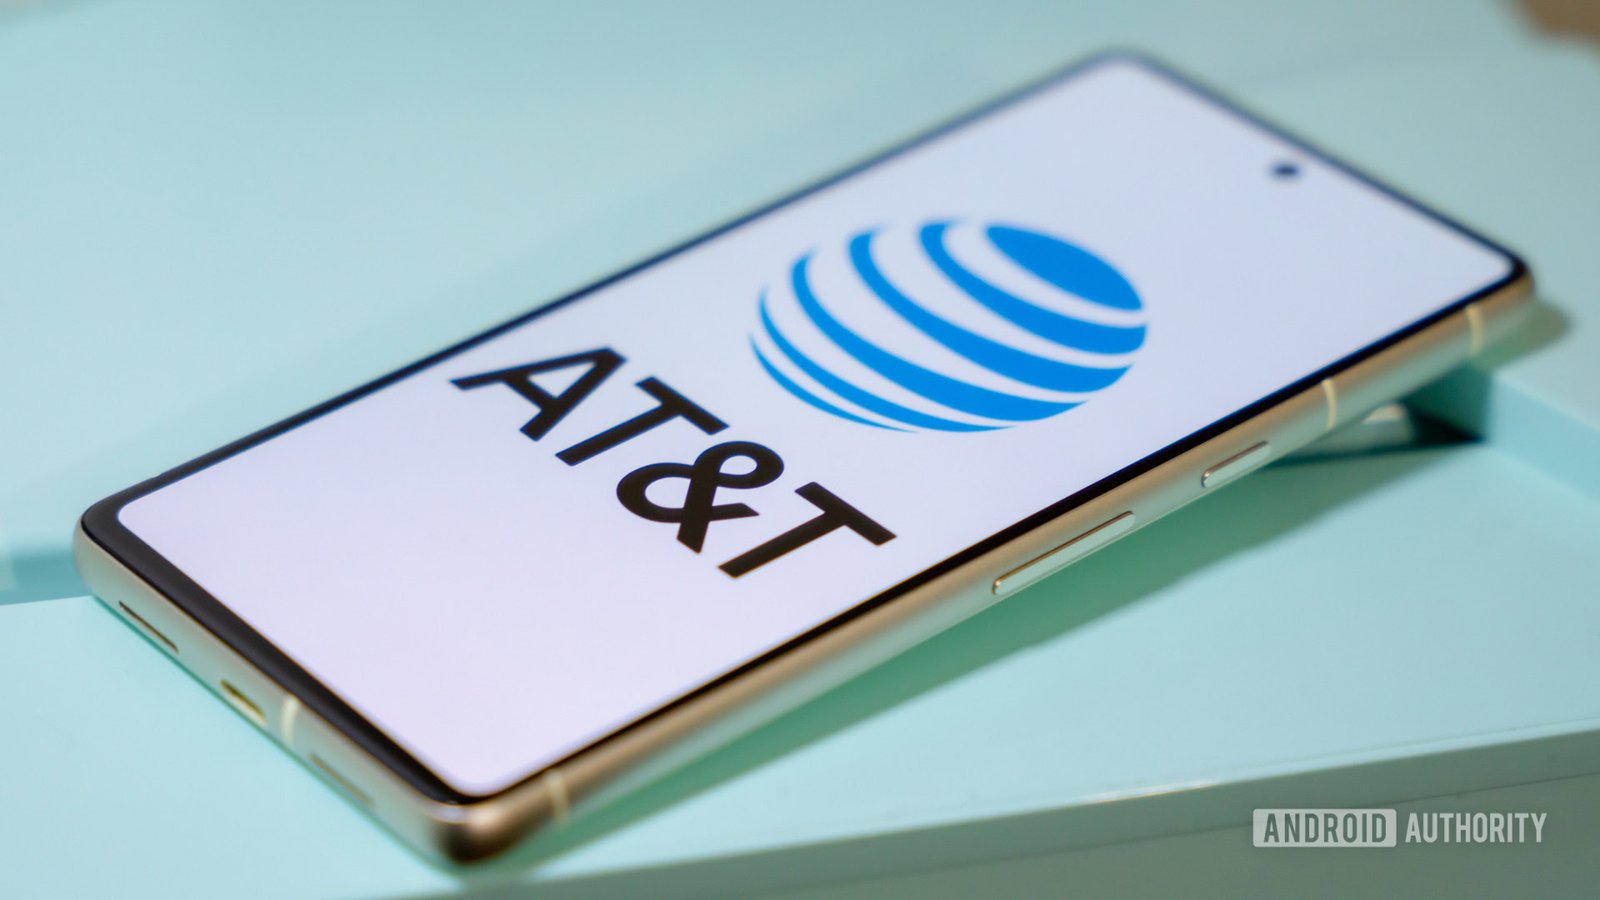 AT&T will let you switch phones up to 3 times in a year for an extra $10/month